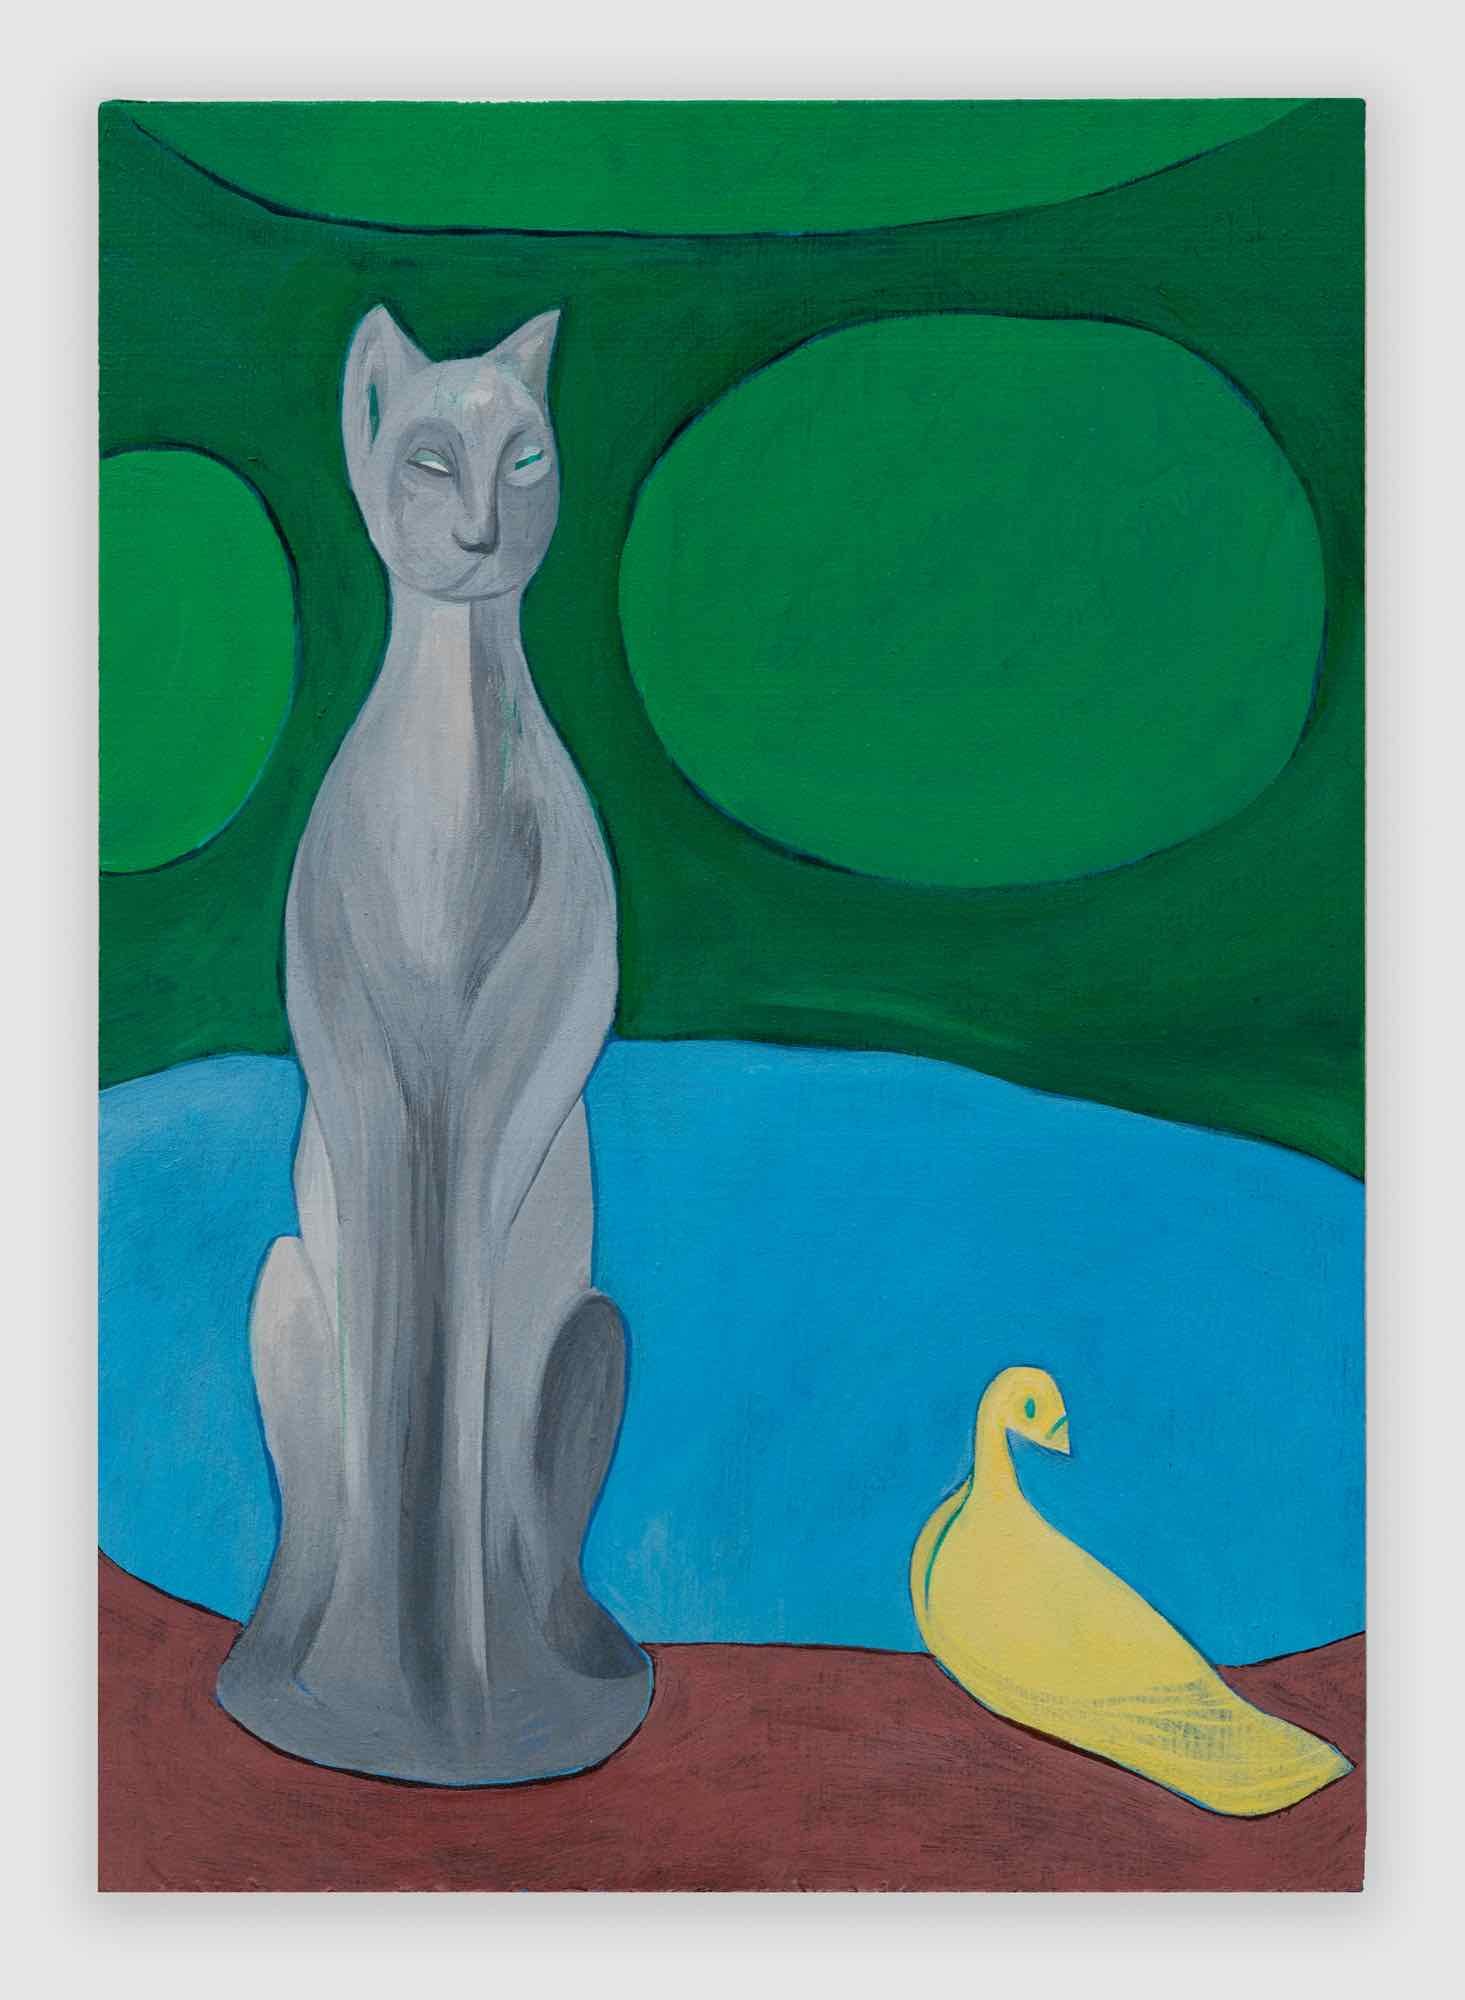    Cat and Bird    Acrylic on panel   7 x 5 x .75 inches 